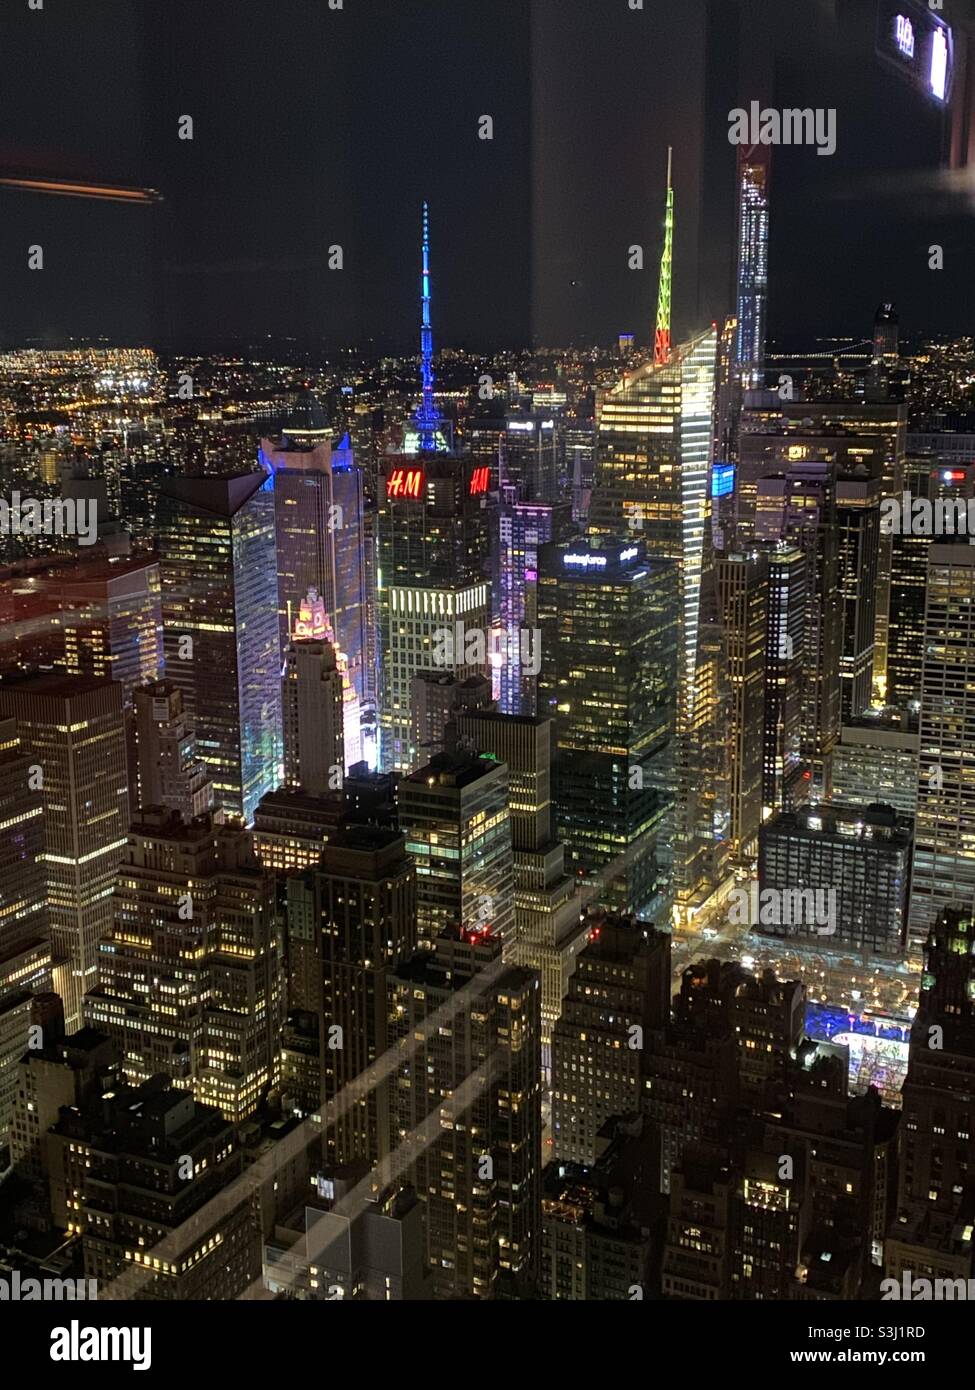 New York by night taken from the Empire State Building showing H&M building  in December 2019 Stock Photo - Alamy